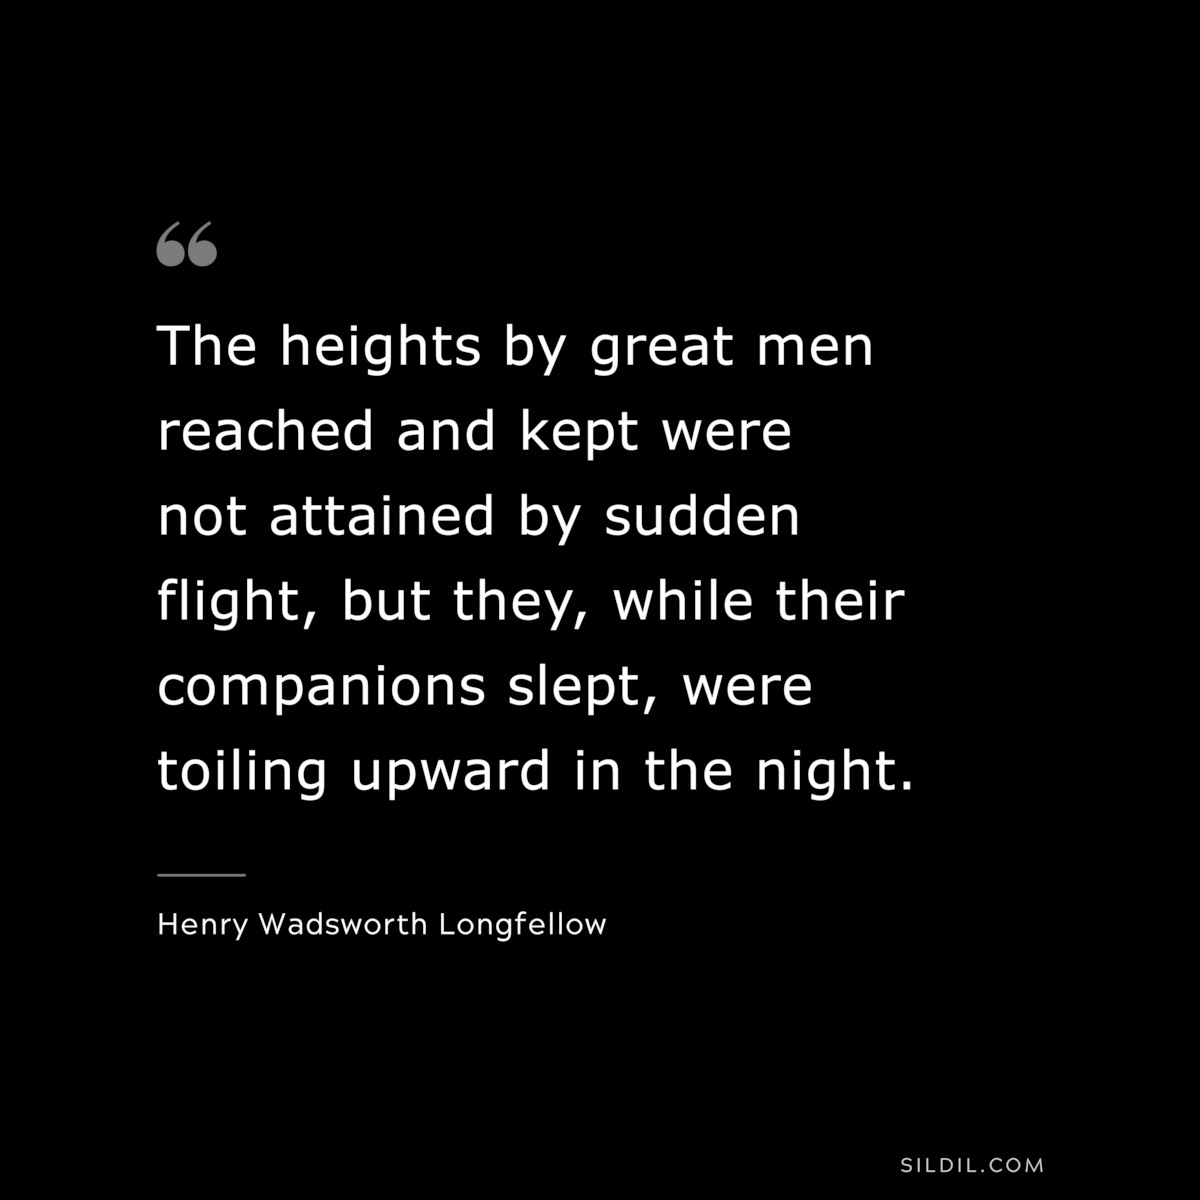 The heights by great men reached and kept were not attained by sudden flight, but they, while their companions slept, were toiling upward in the night. ― Henry Wadsworth Longfellow